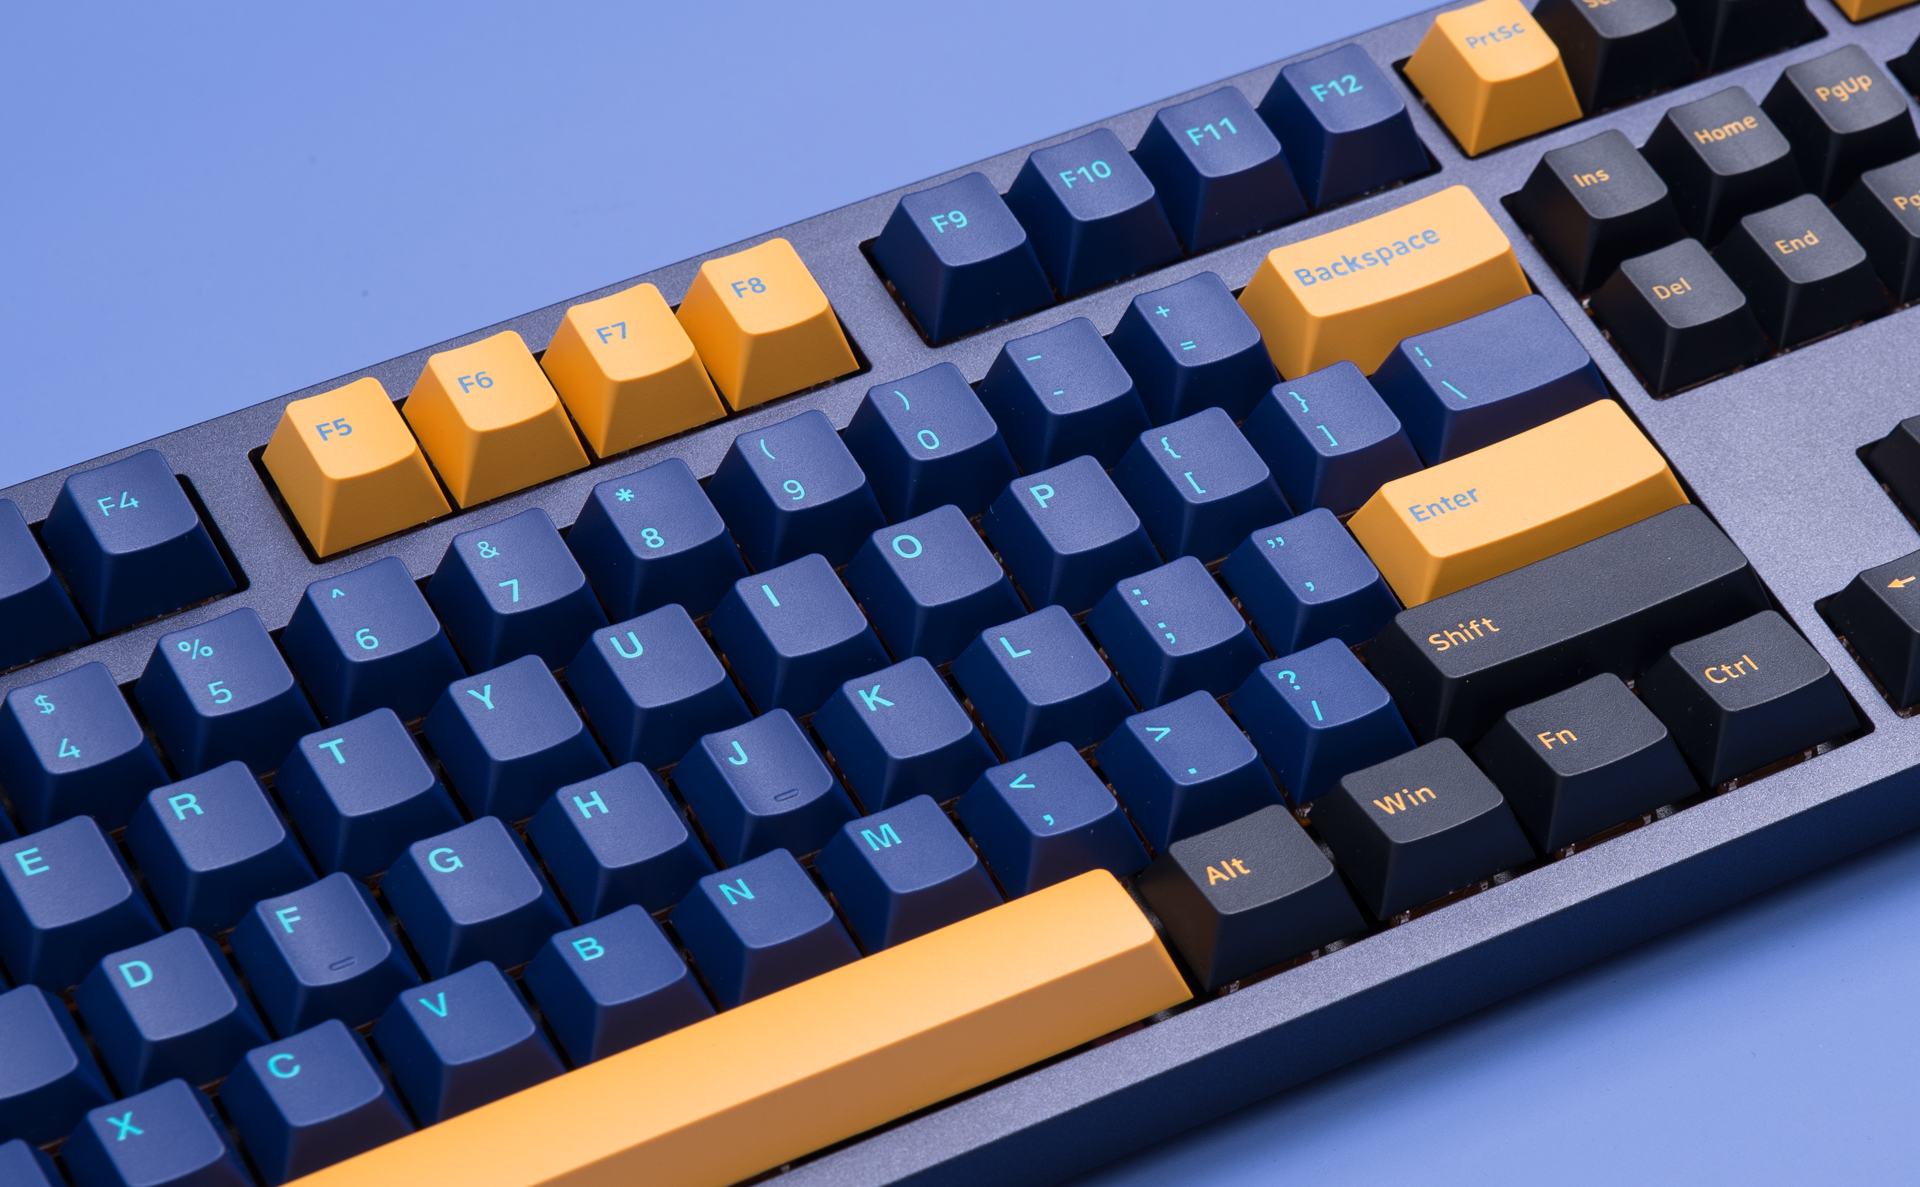 Akko 3108 DS Horizon Full-Size Mechanical Gaming Keyboard Wired 108-key with Cherry Profile PBT Double-Shot Keycaps